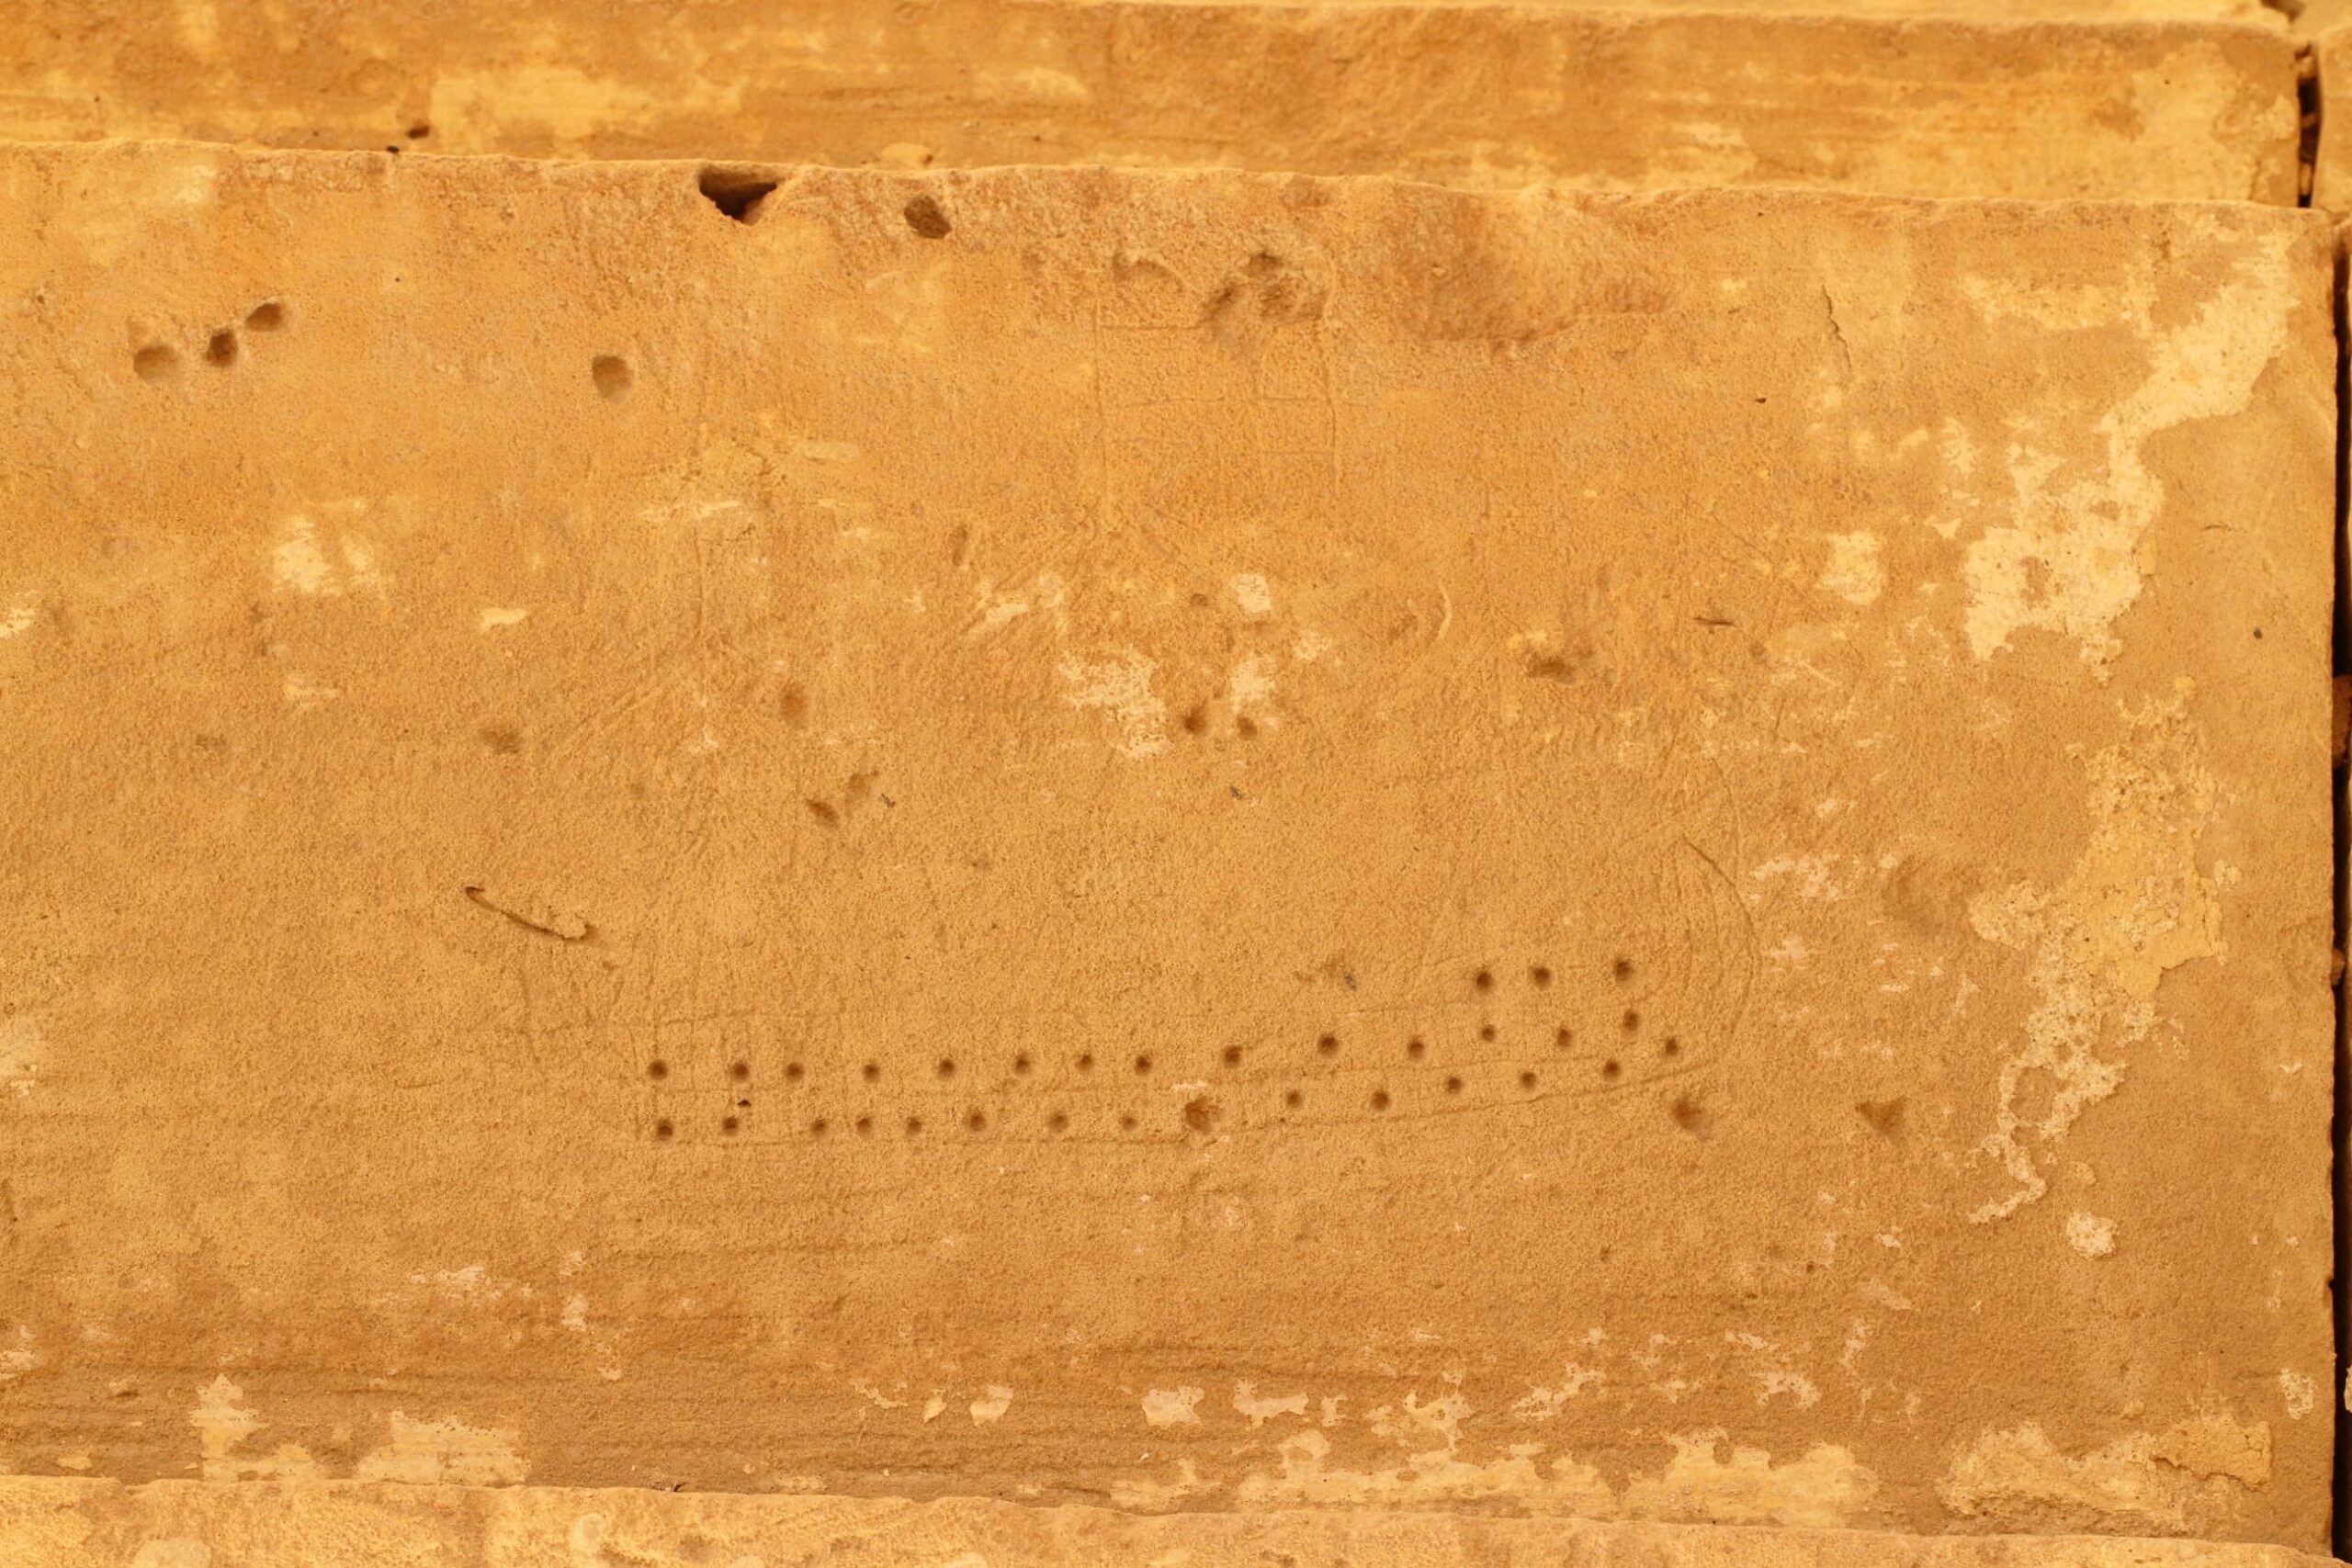 Dot decoration is visible on this ship graffito. The rigging is disappearing over time, however, one can note the presence of masts and flags.